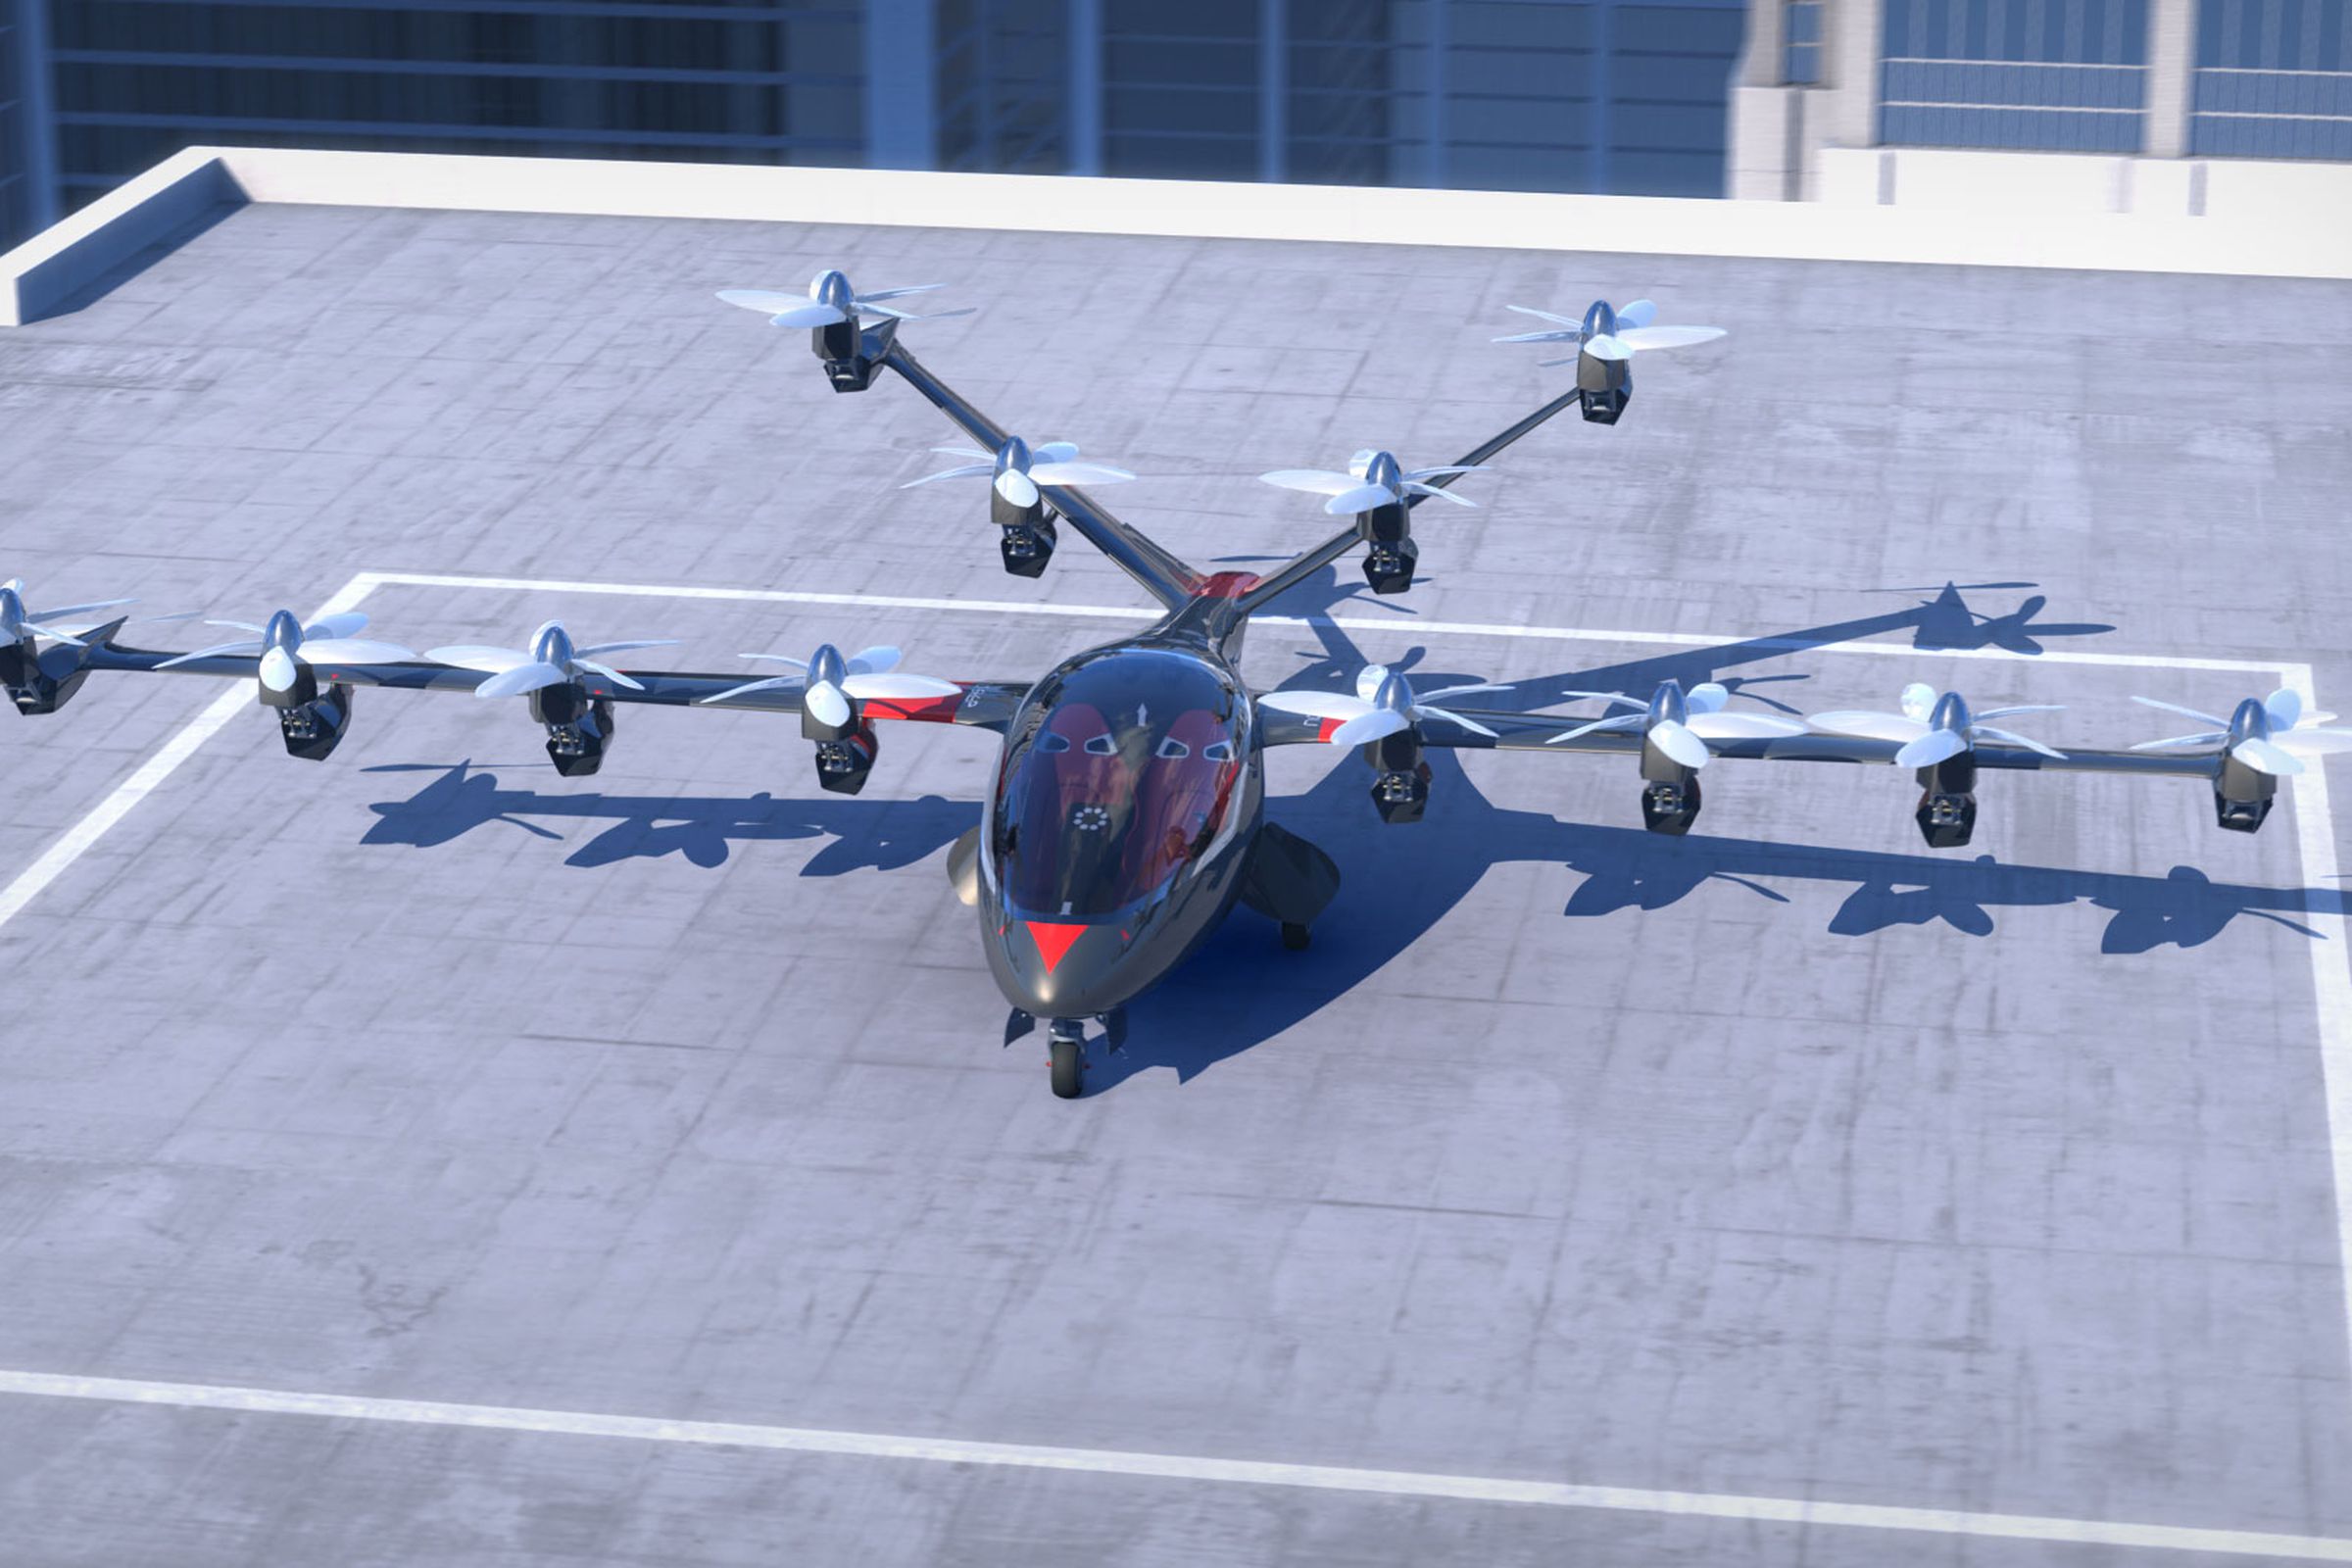 An older rendering of Joby Aviation’s aircraft; the company has not revealed its latest prototype yet